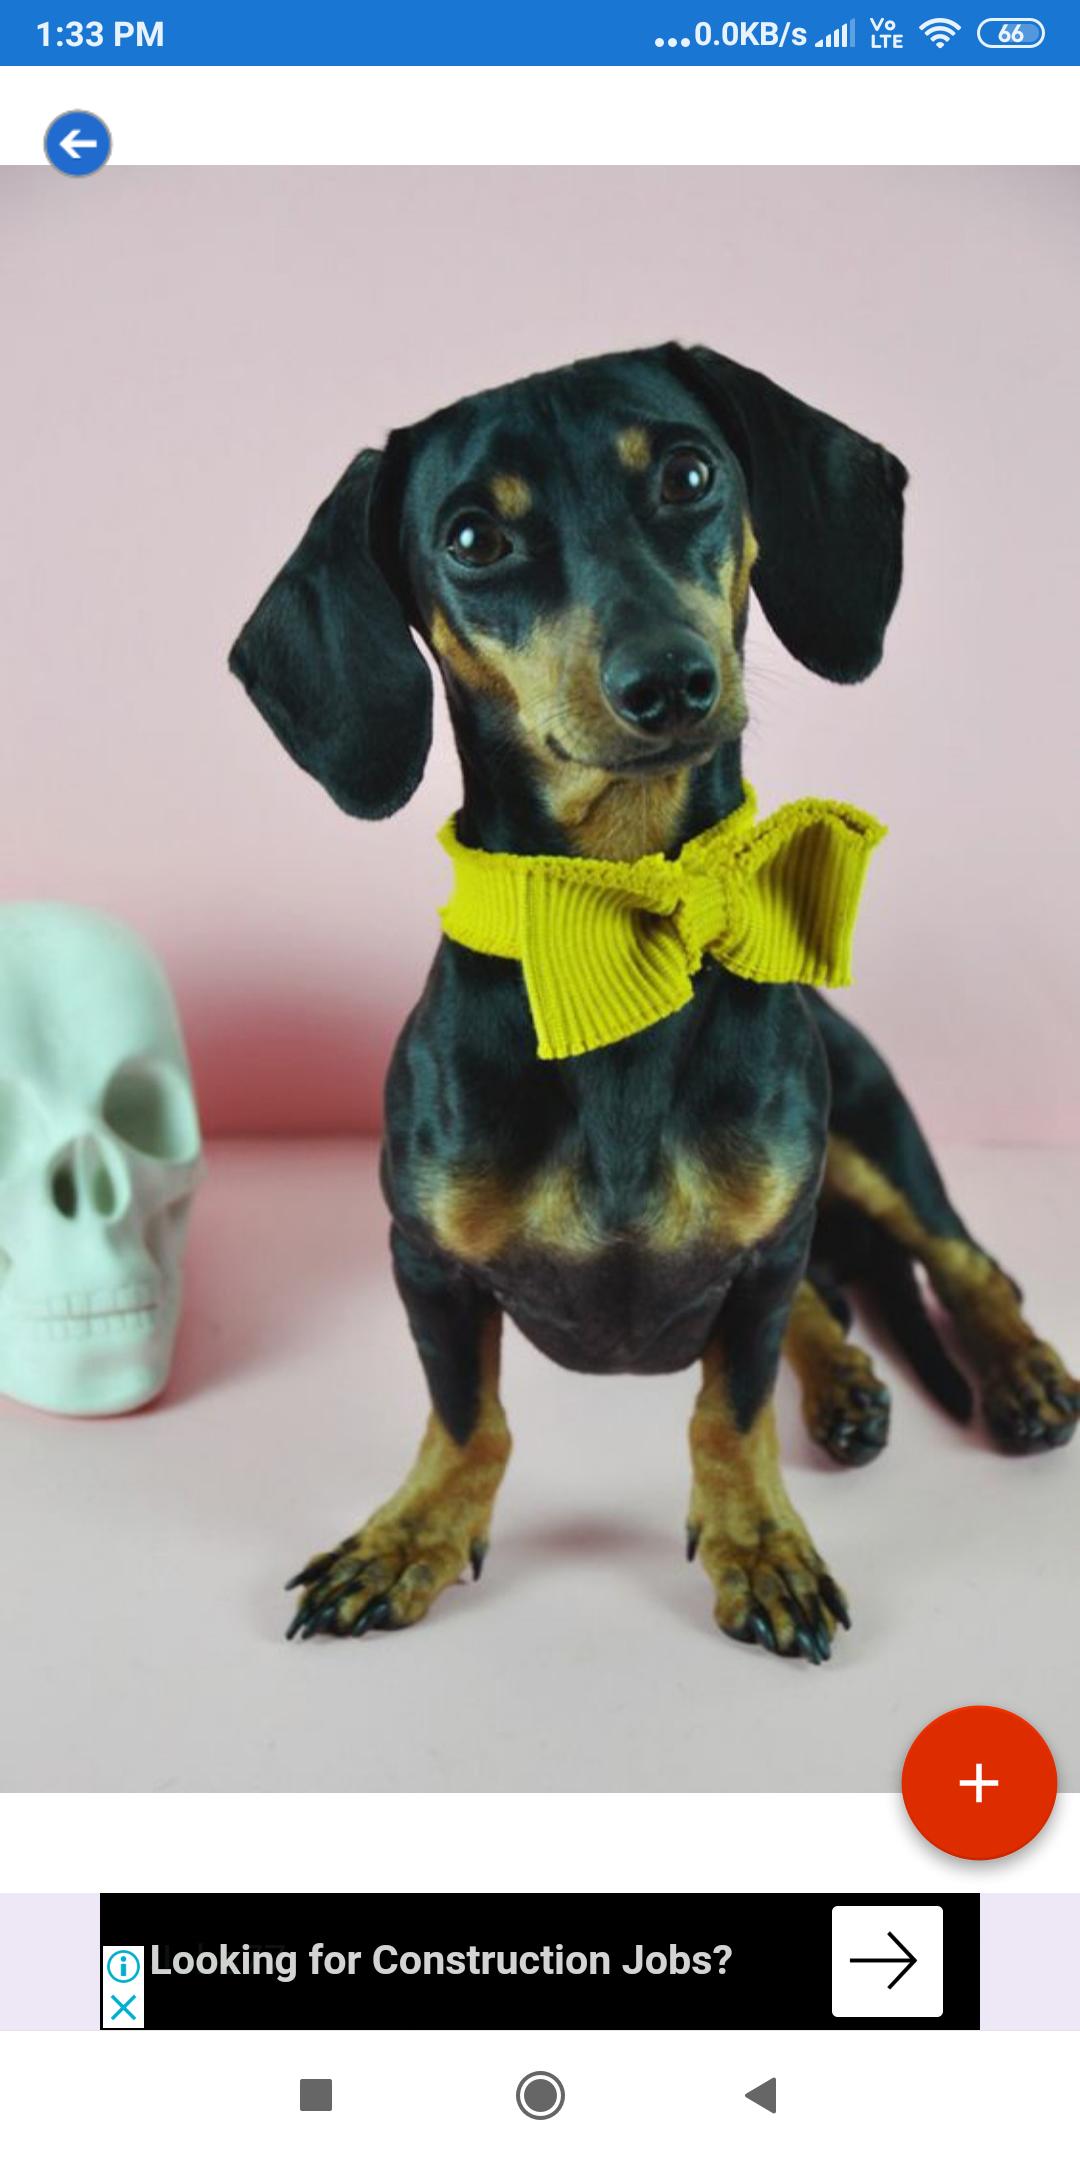 Dachshund Wallpapers: HD Images,Free Pics download 2.0.37 Screenshot 8